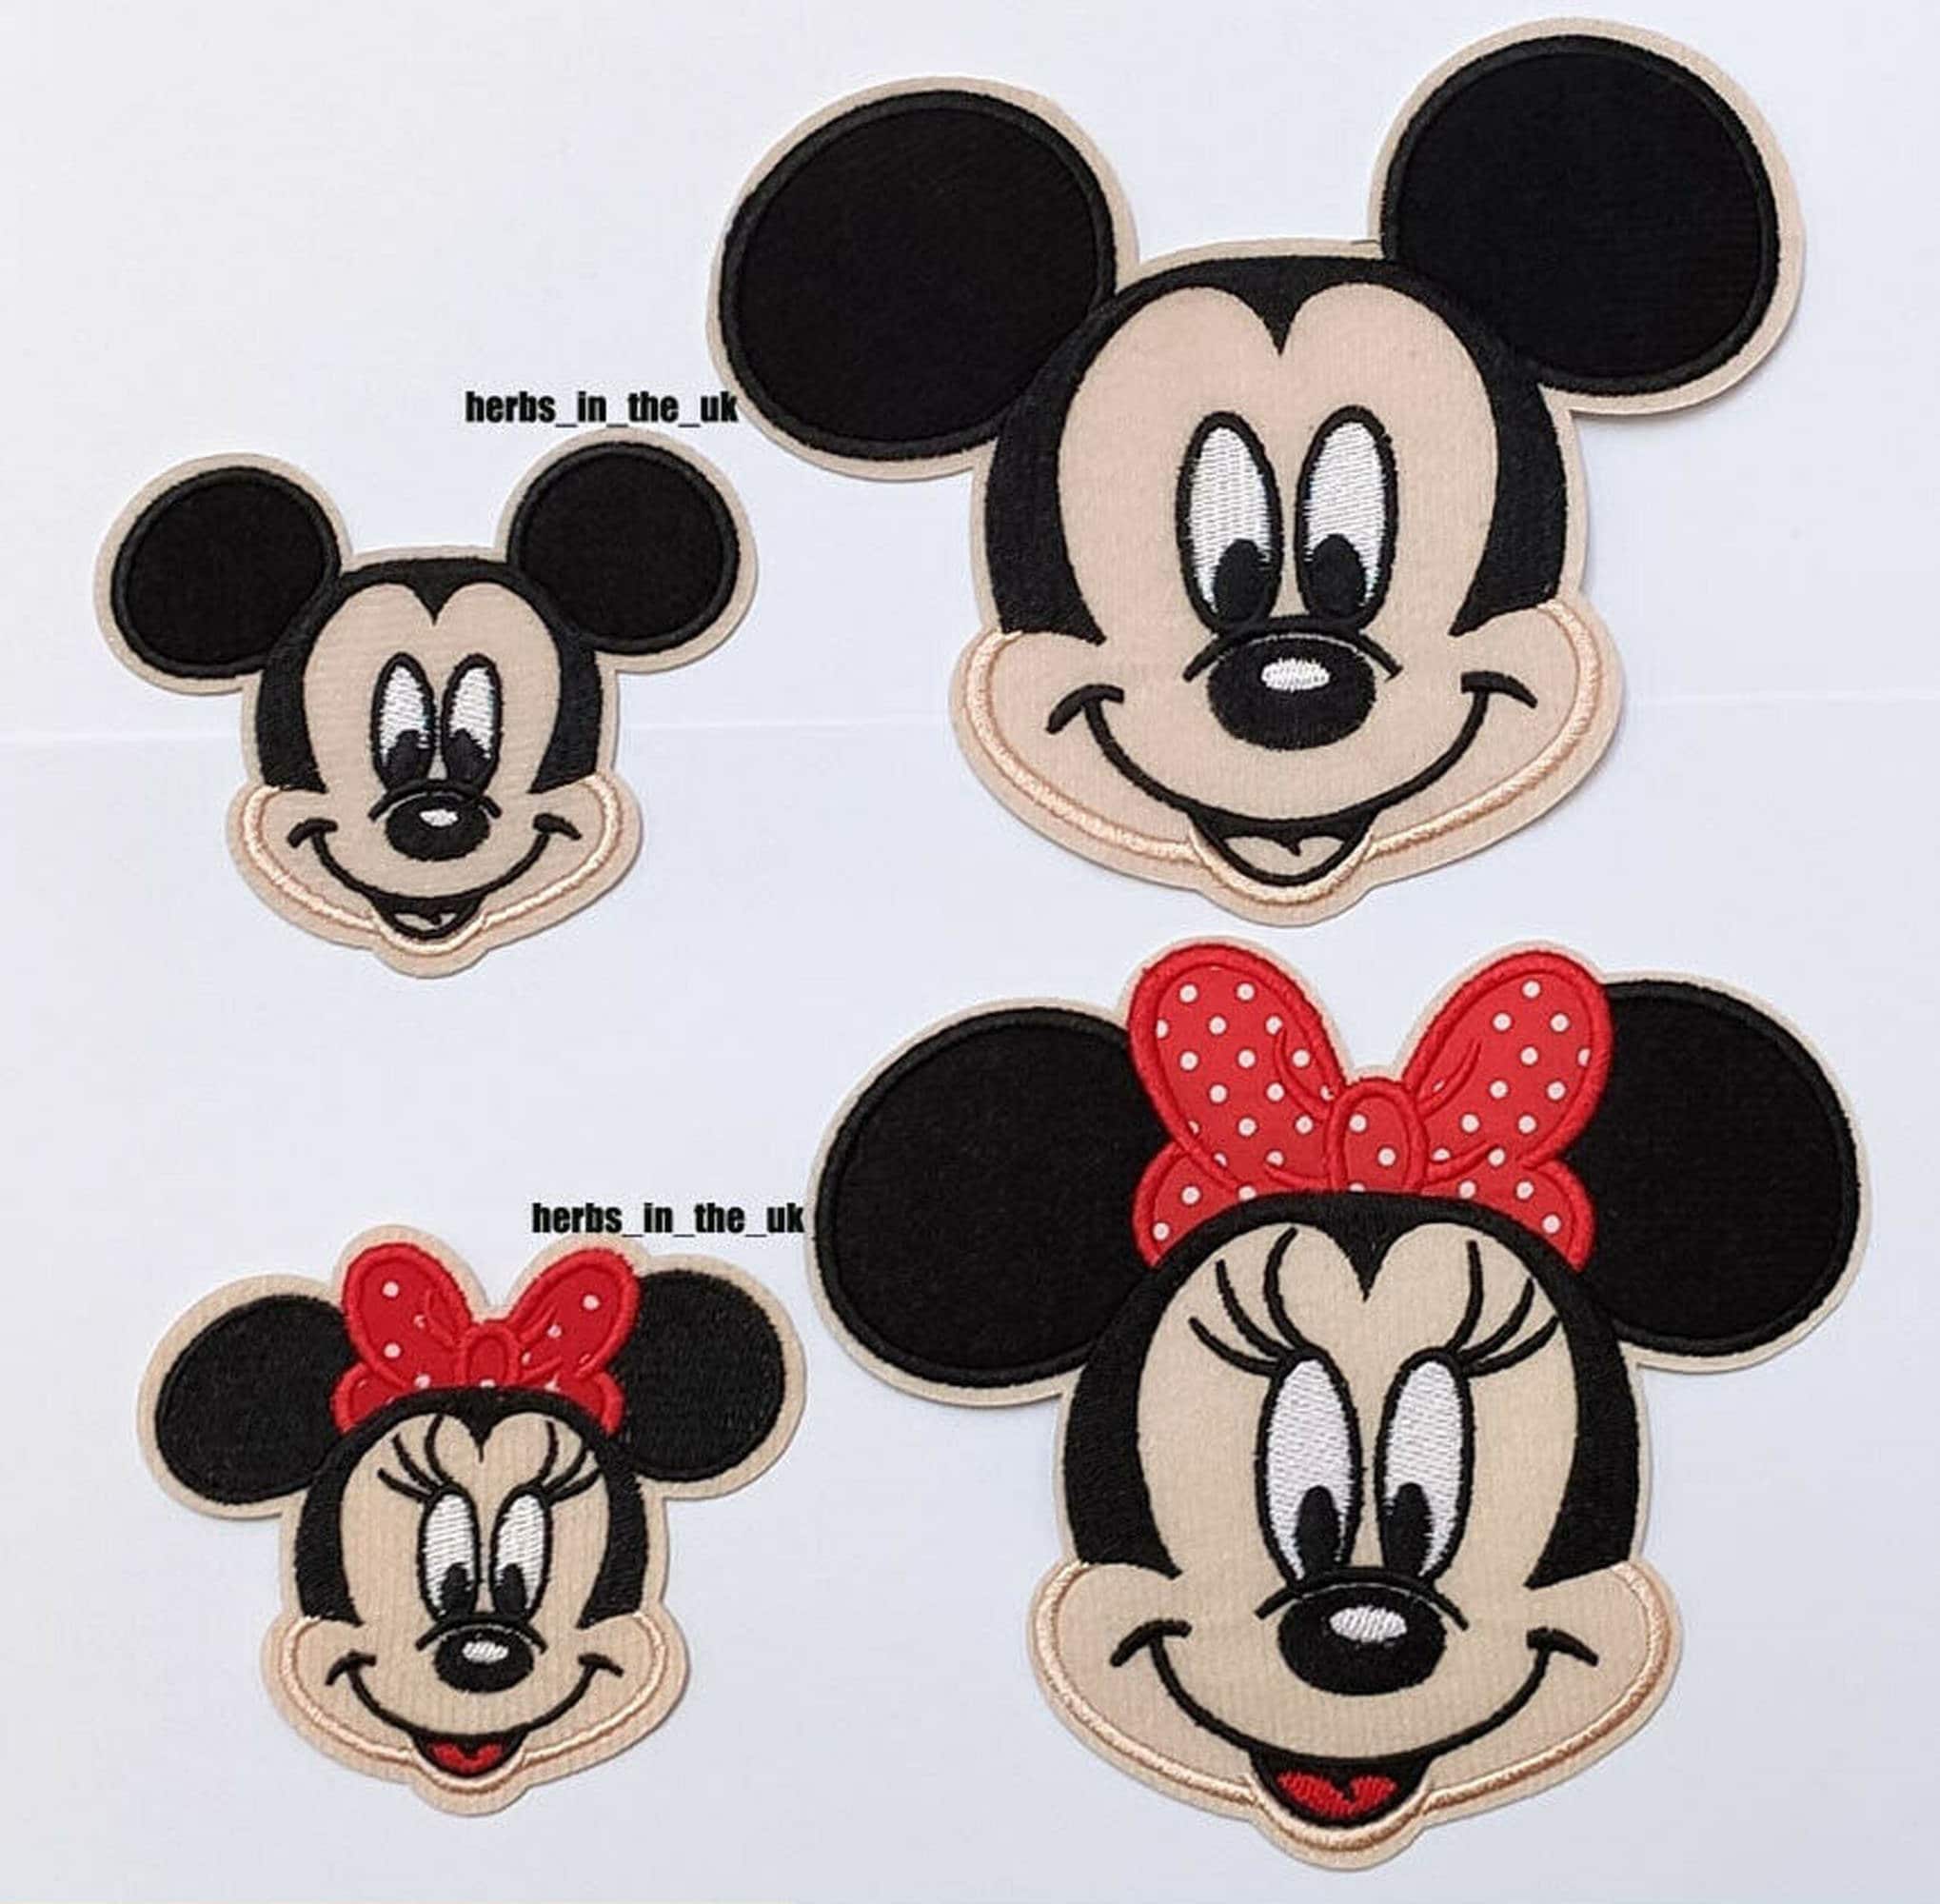 Iron on Patches MINNIE MOUSES oval Disney Pink 8,8x6cm Application